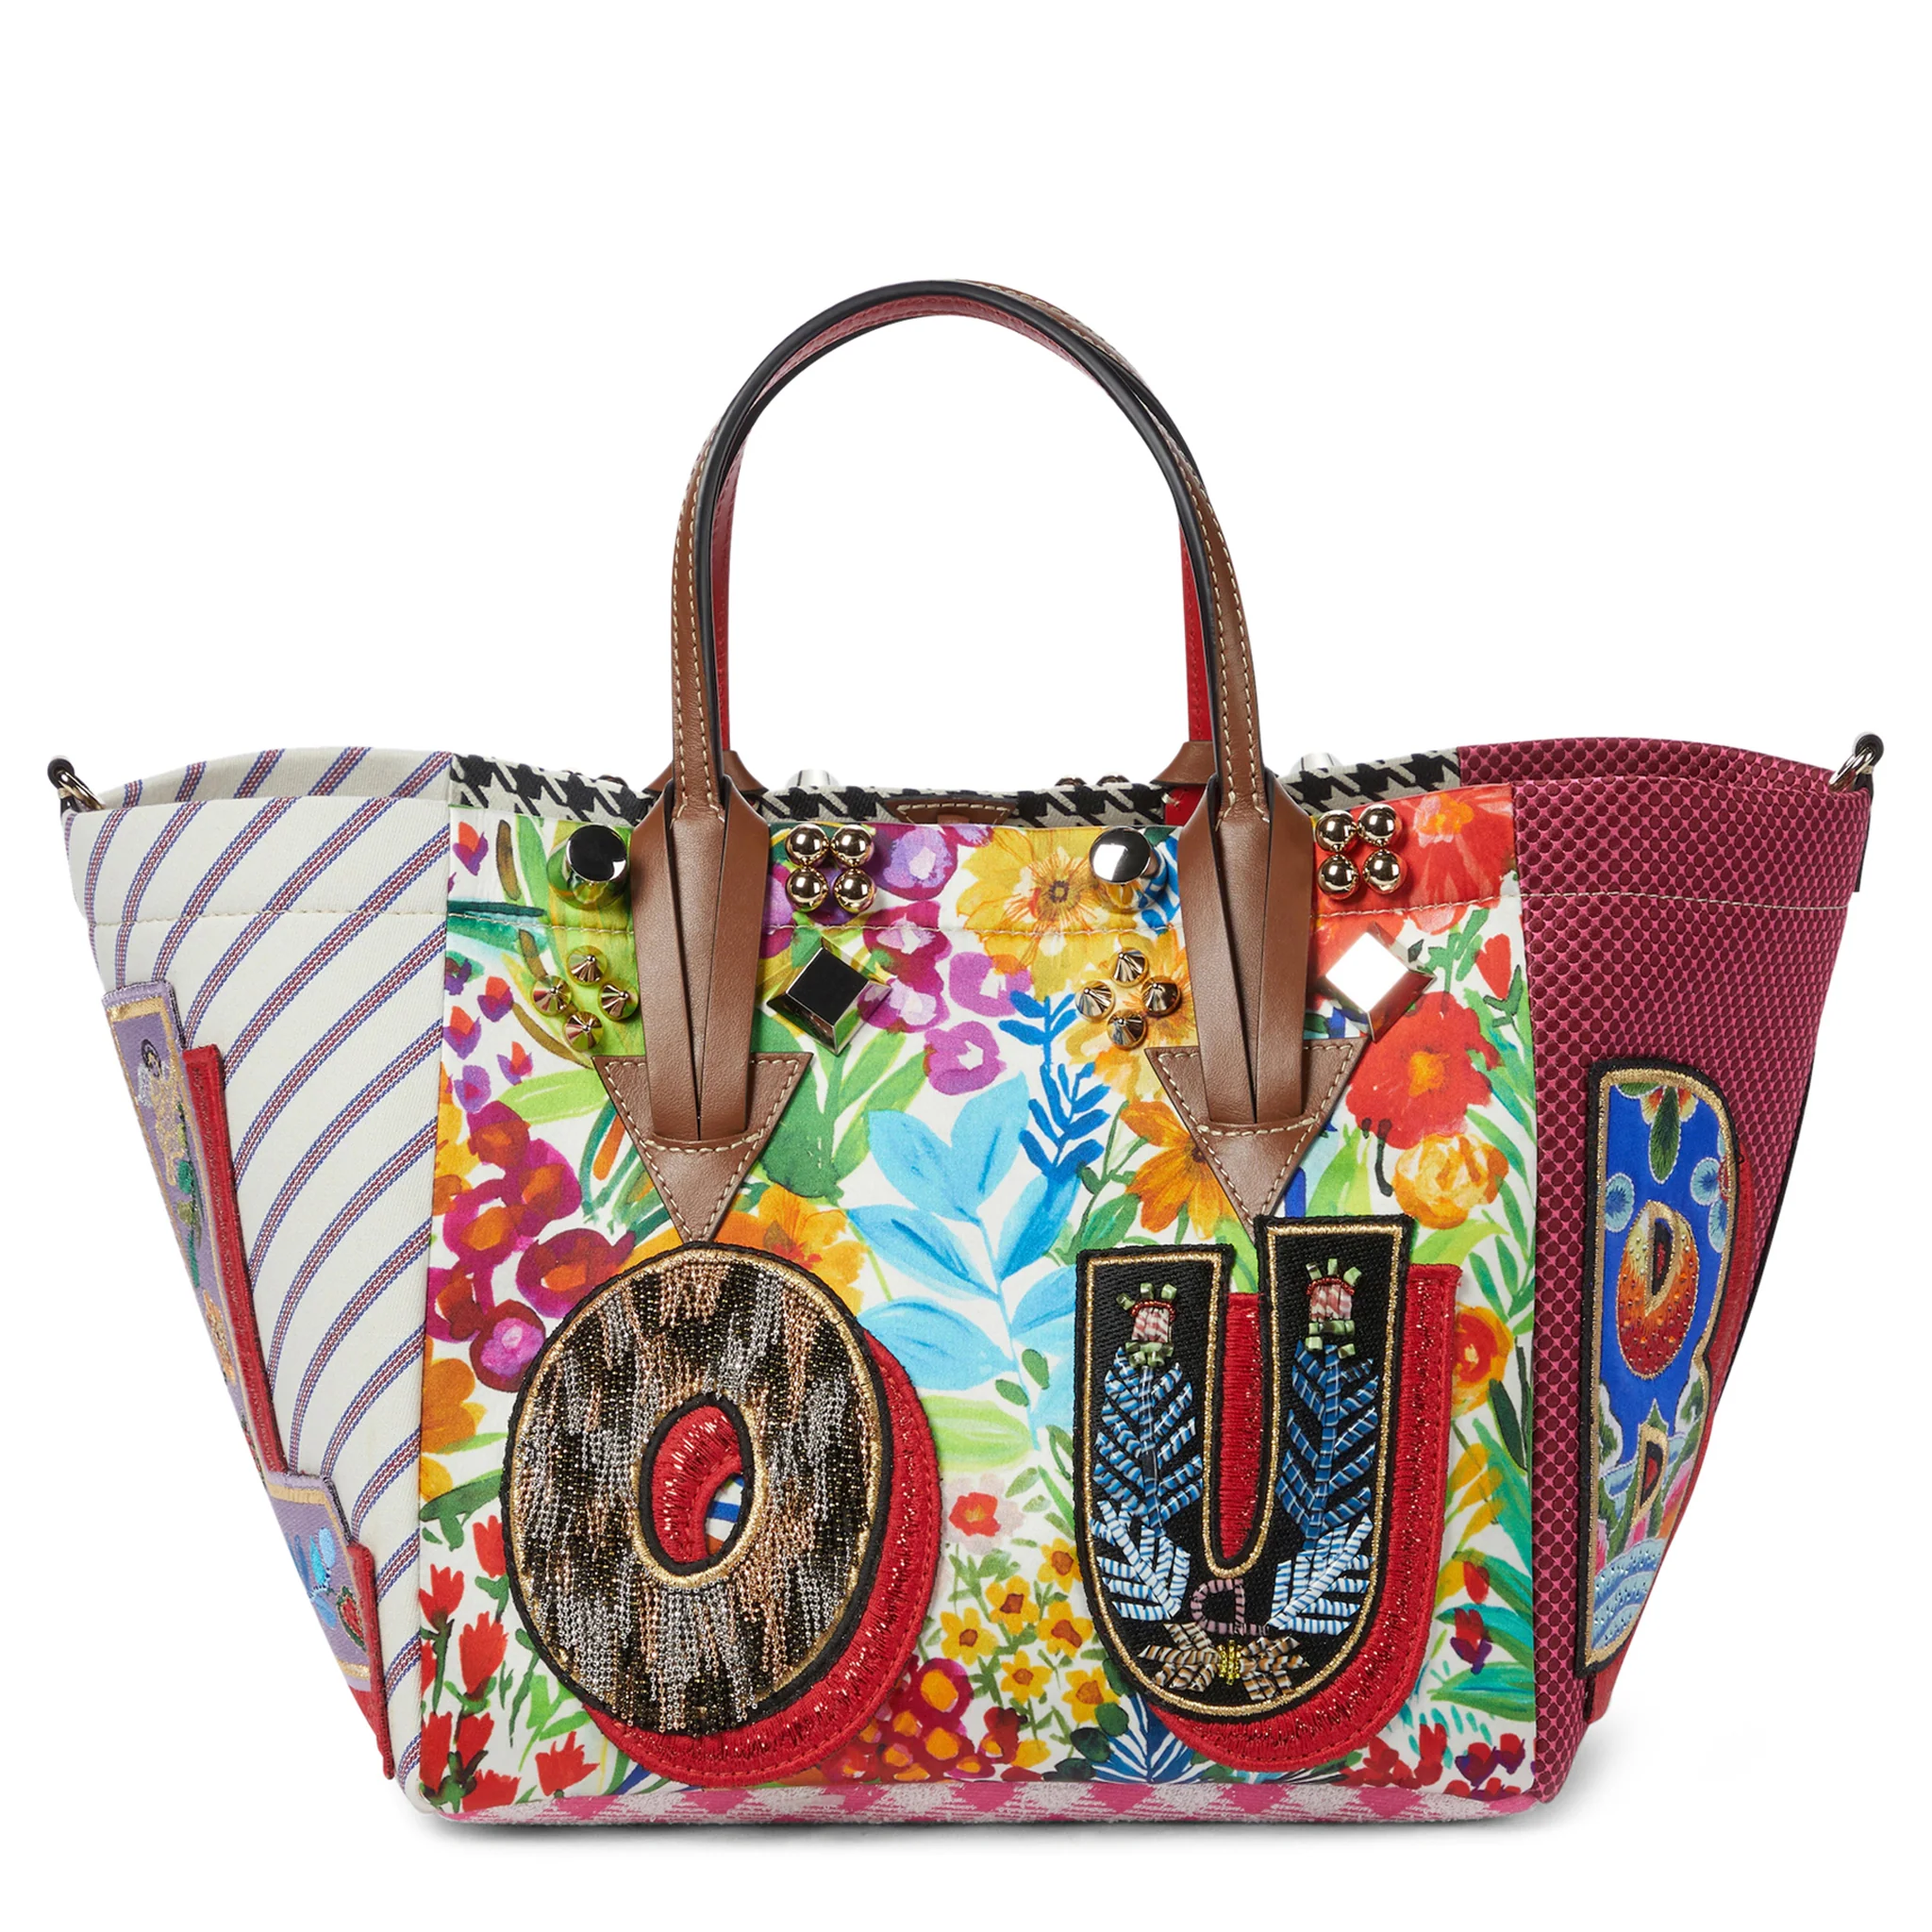 Christian-Louboutin-Caracaba-Small-Cotton-Patch-Canvas-Tote-Bag-Crepslocker-Front_1